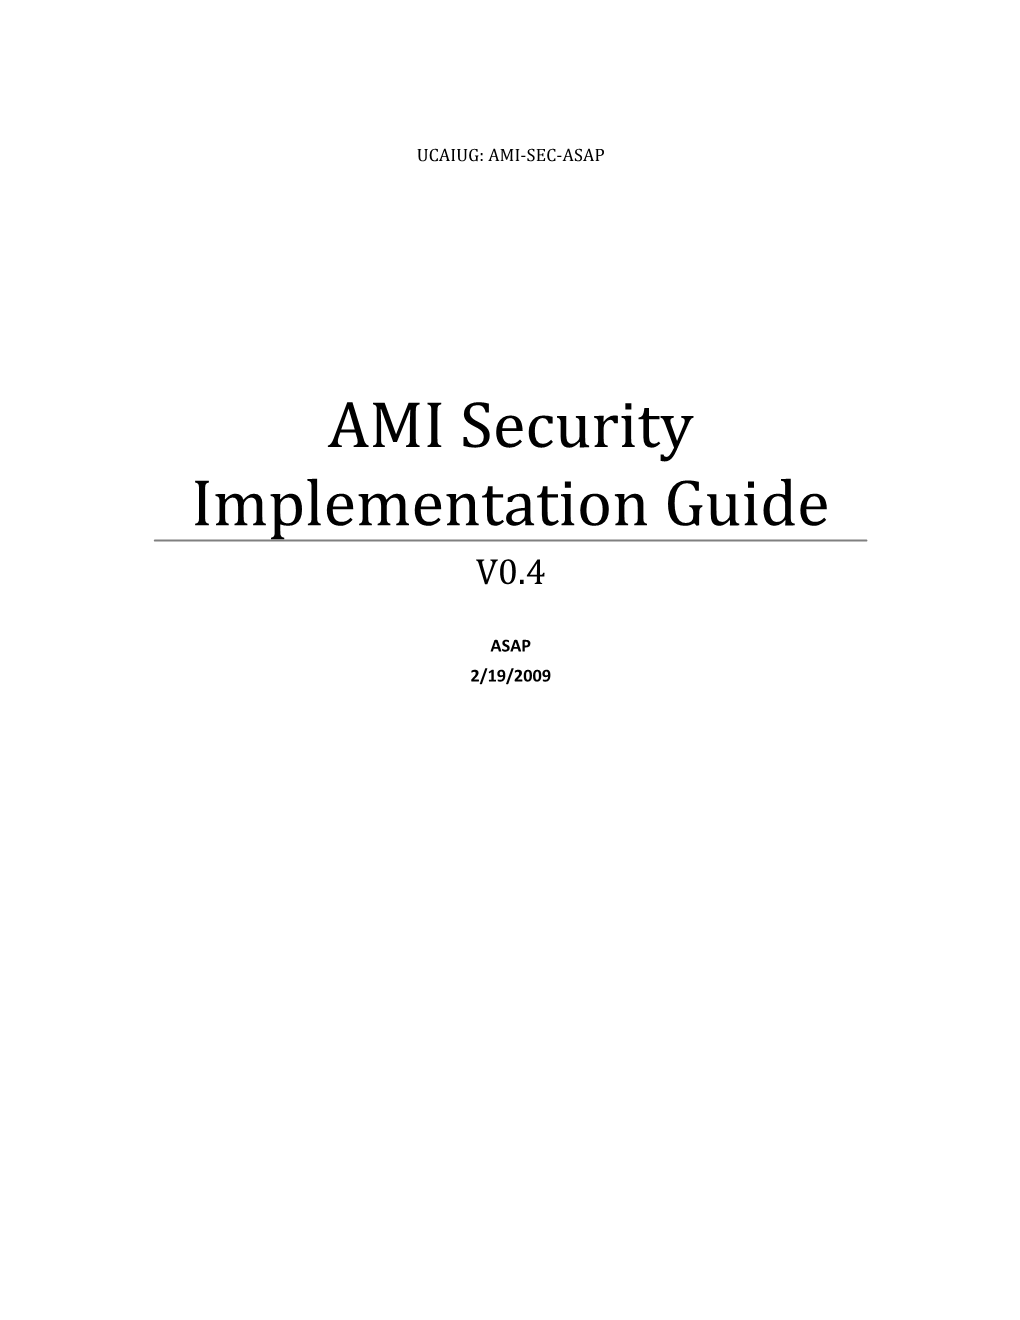 AMI Security Implementation Guide